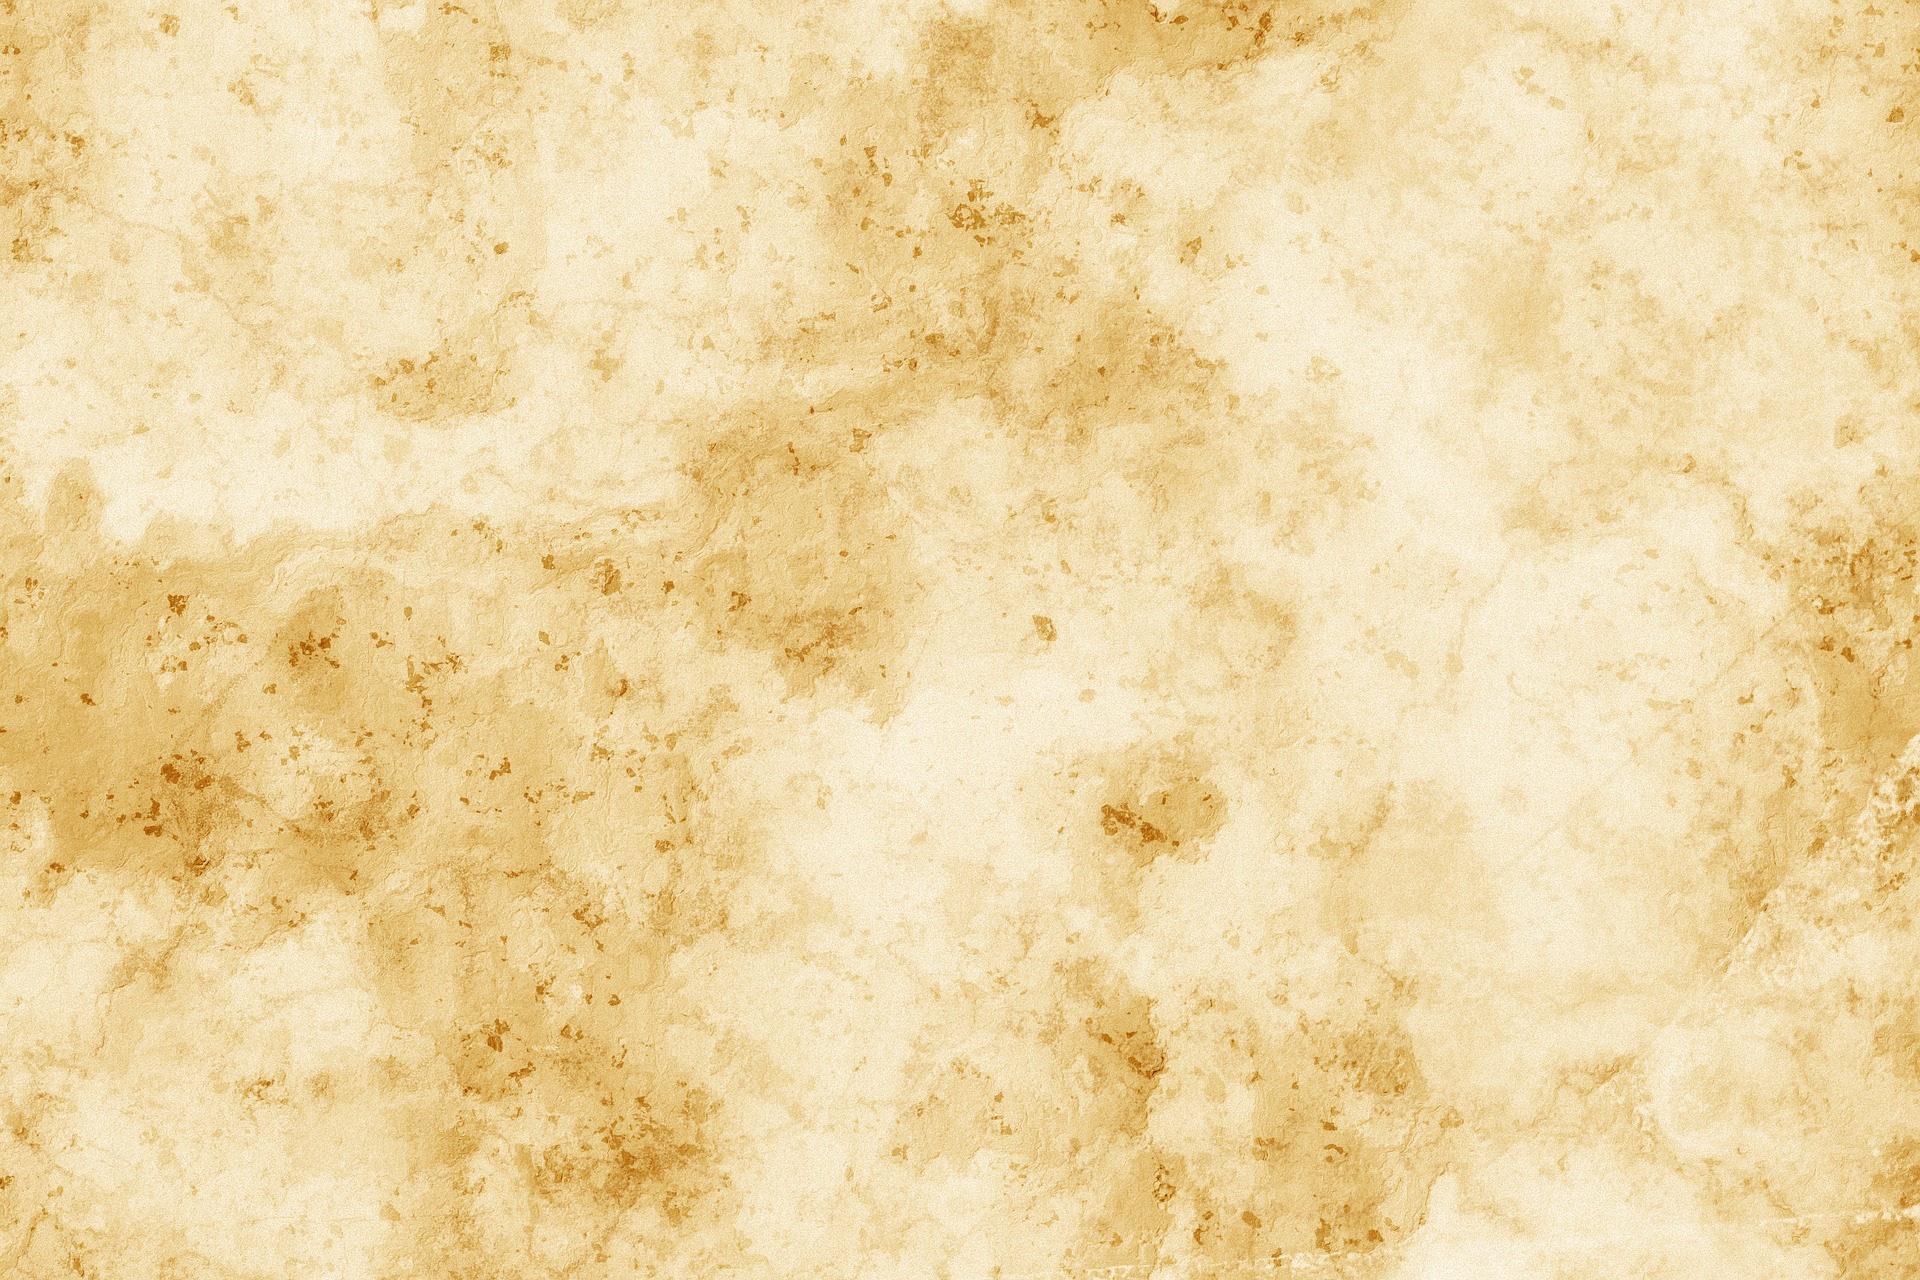 marble-2268498_1920